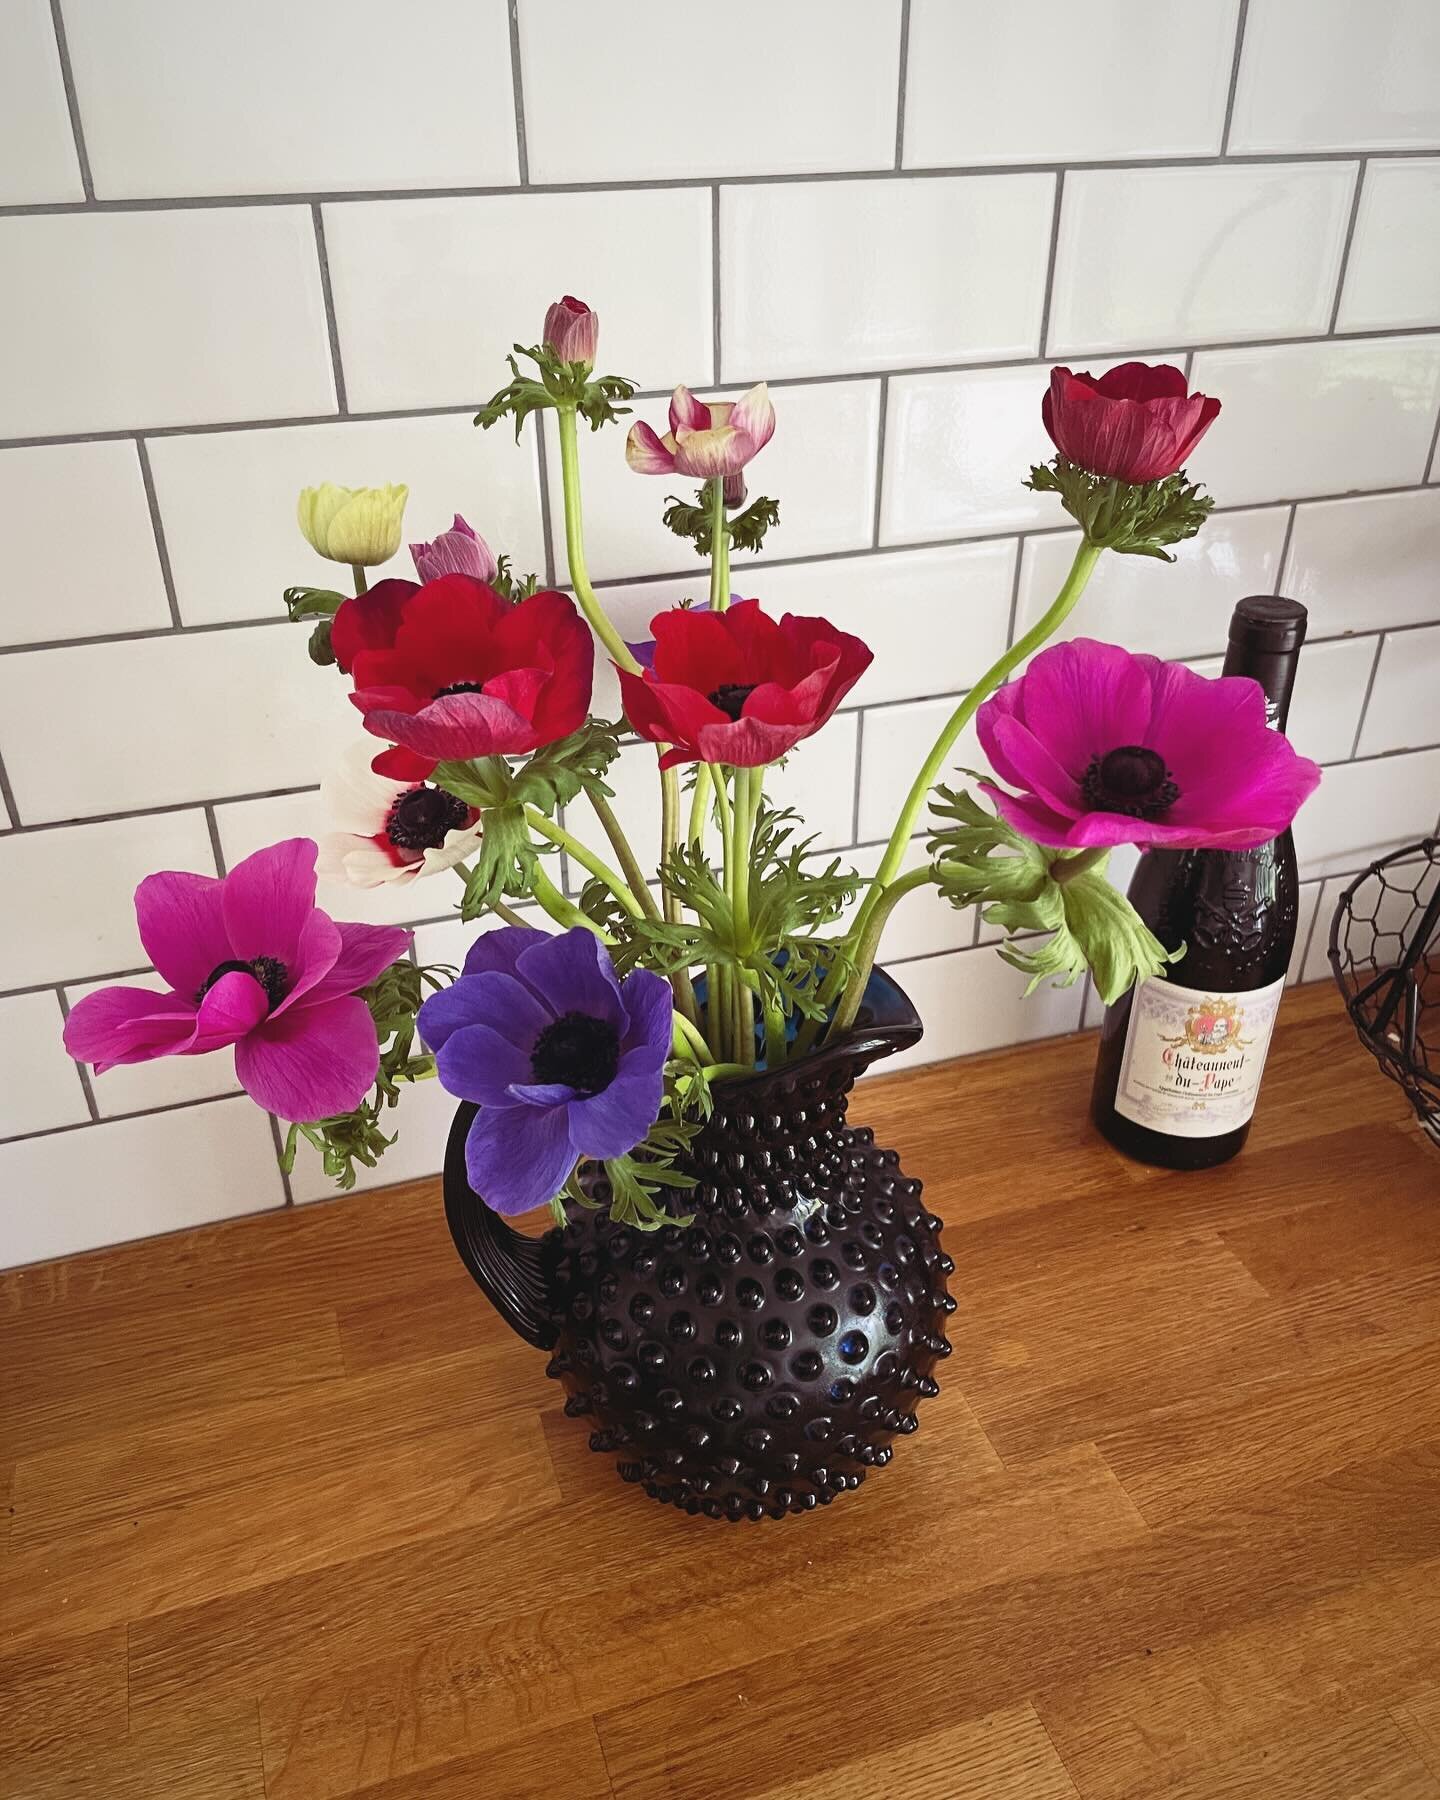 Anemones giving the kitchen some magic.💫